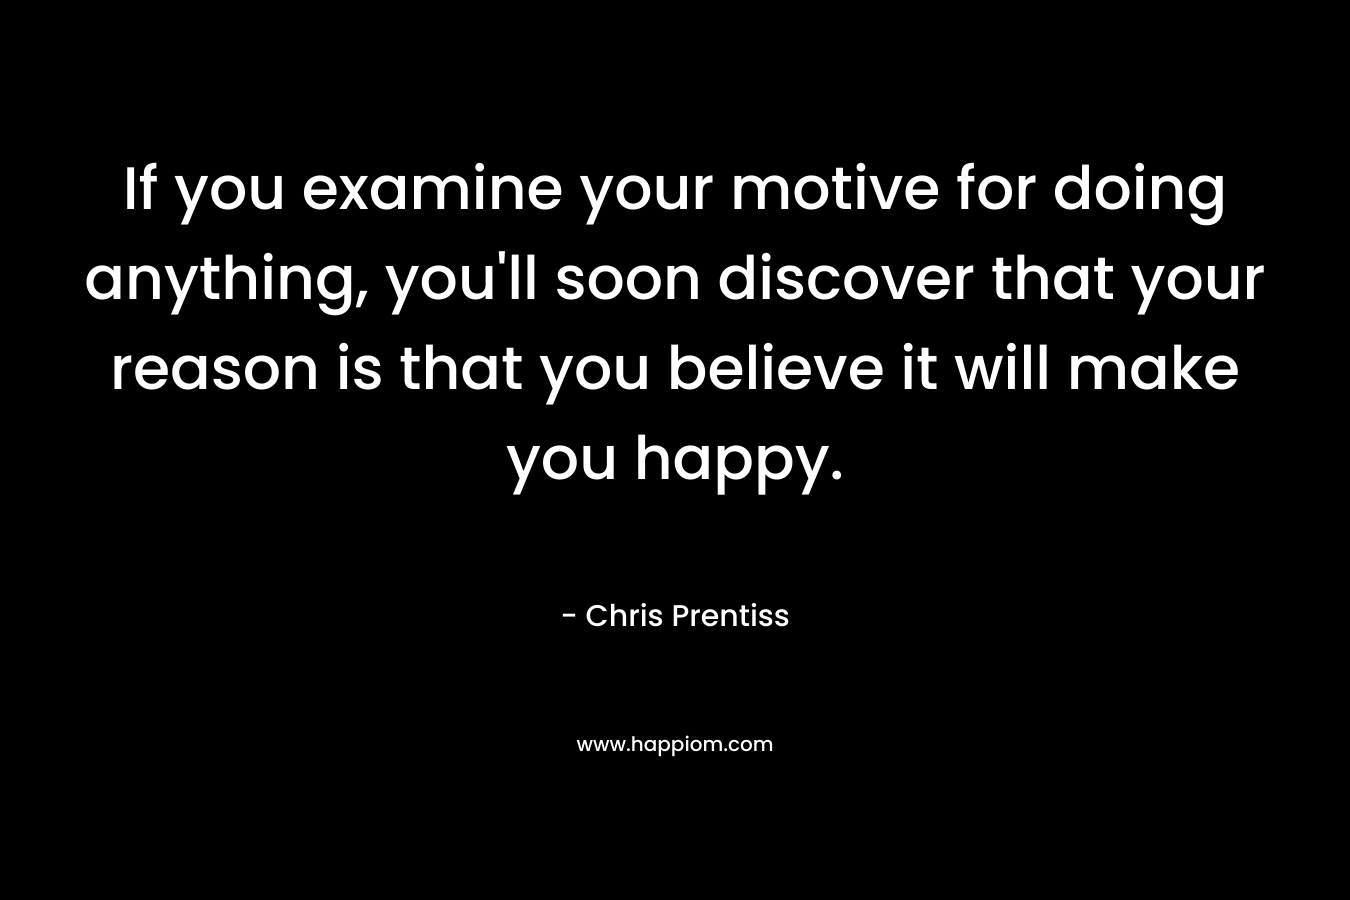 If you examine your motive for doing anything, you’ll soon discover that your reason is that you believe it will make you happy. – Chris Prentiss